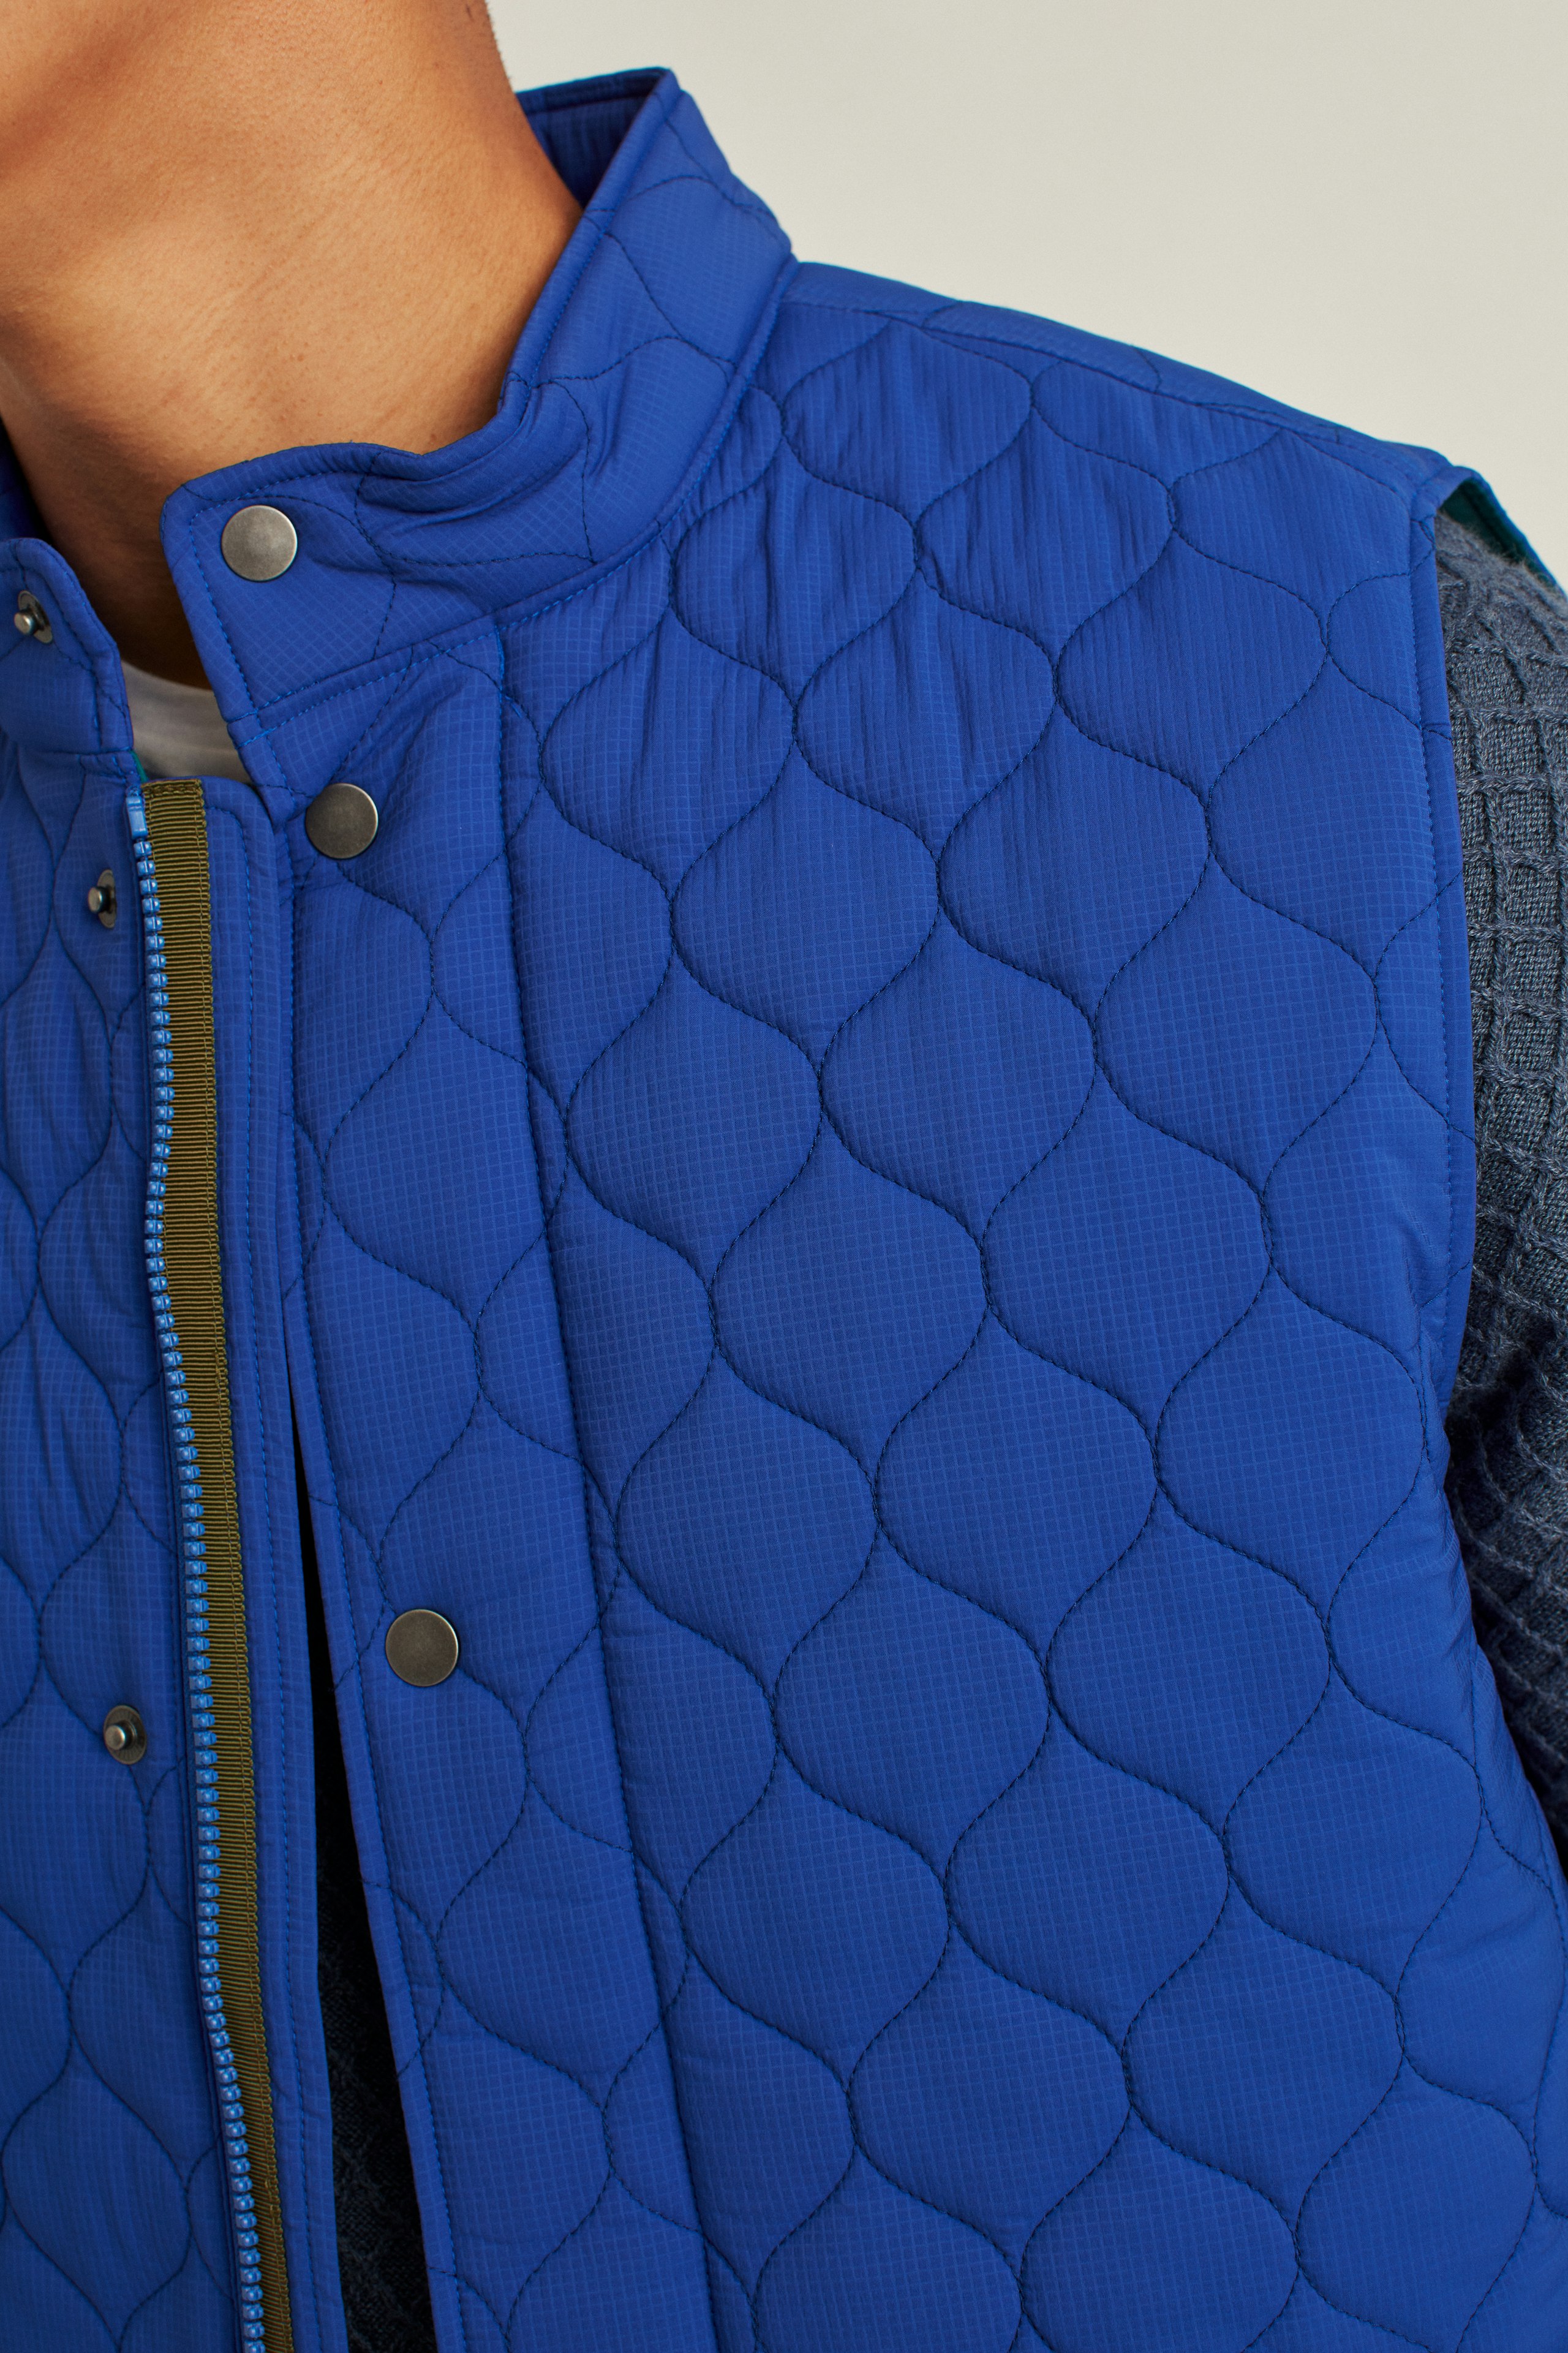 The Lightweight Quilted Vest